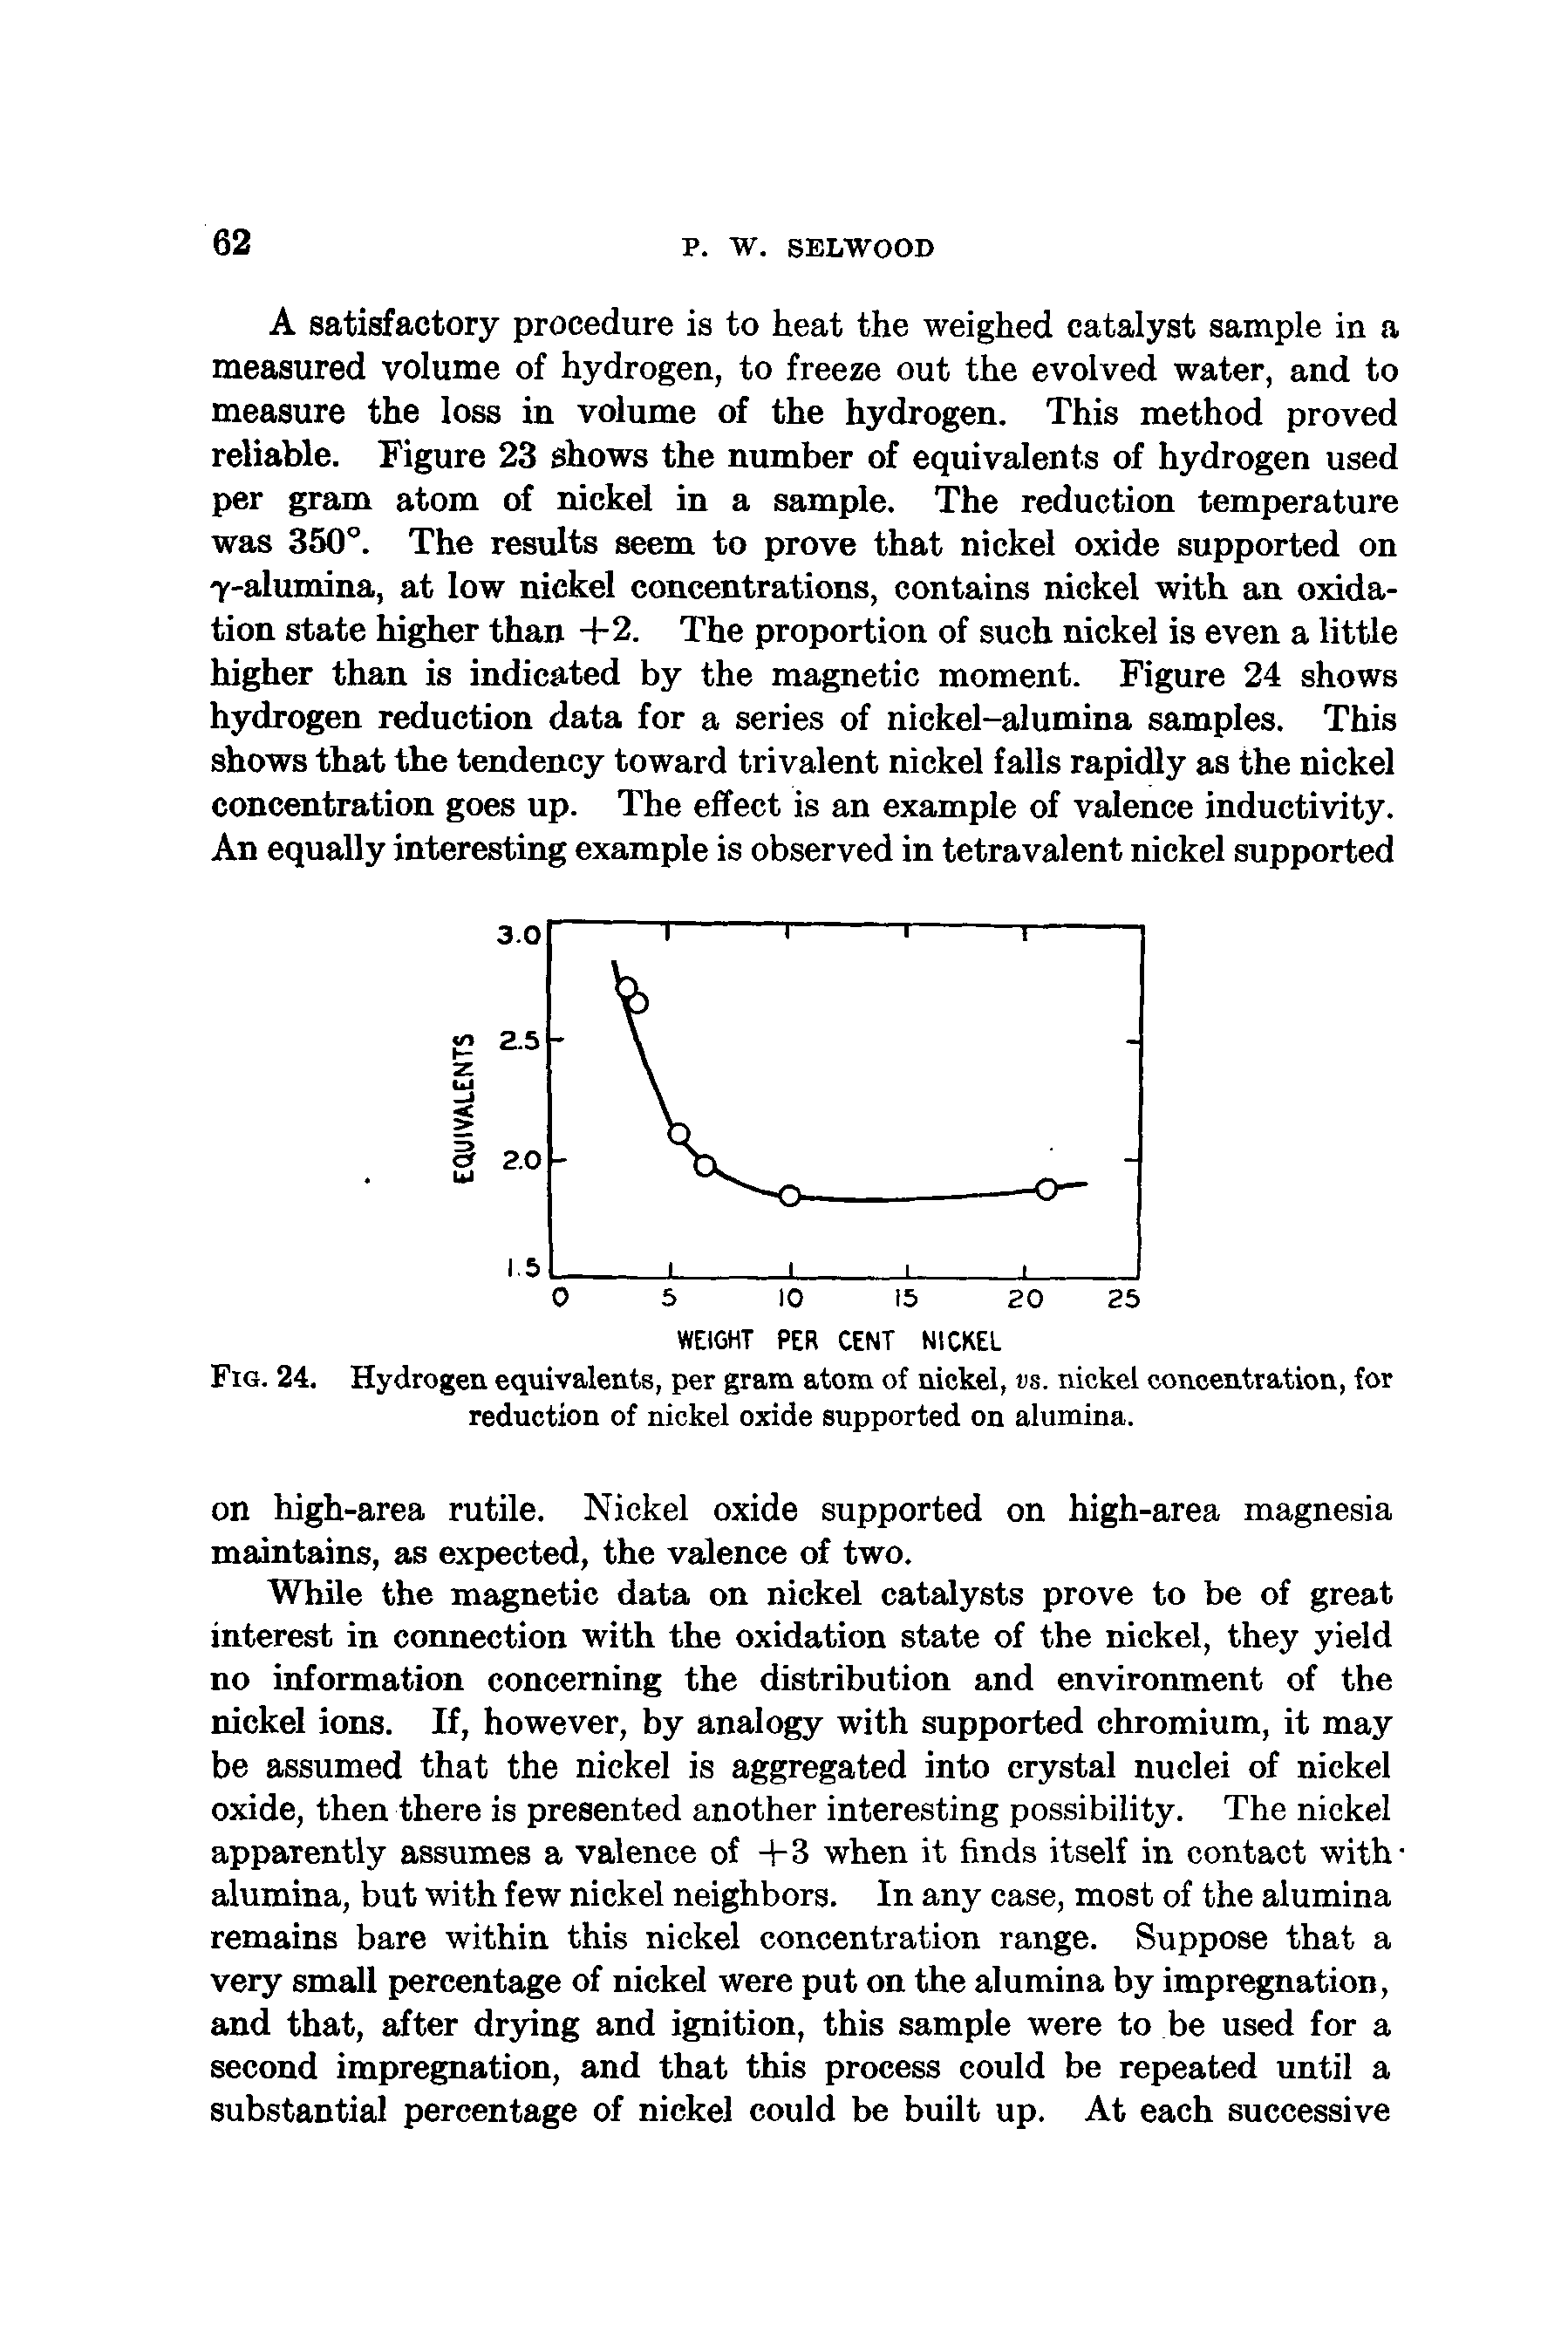 Fig. 24. Hydrogen equivalents, per gram atom of nickel, vs. nickel concentration, for reduction of nickel oxide supported on alumina.